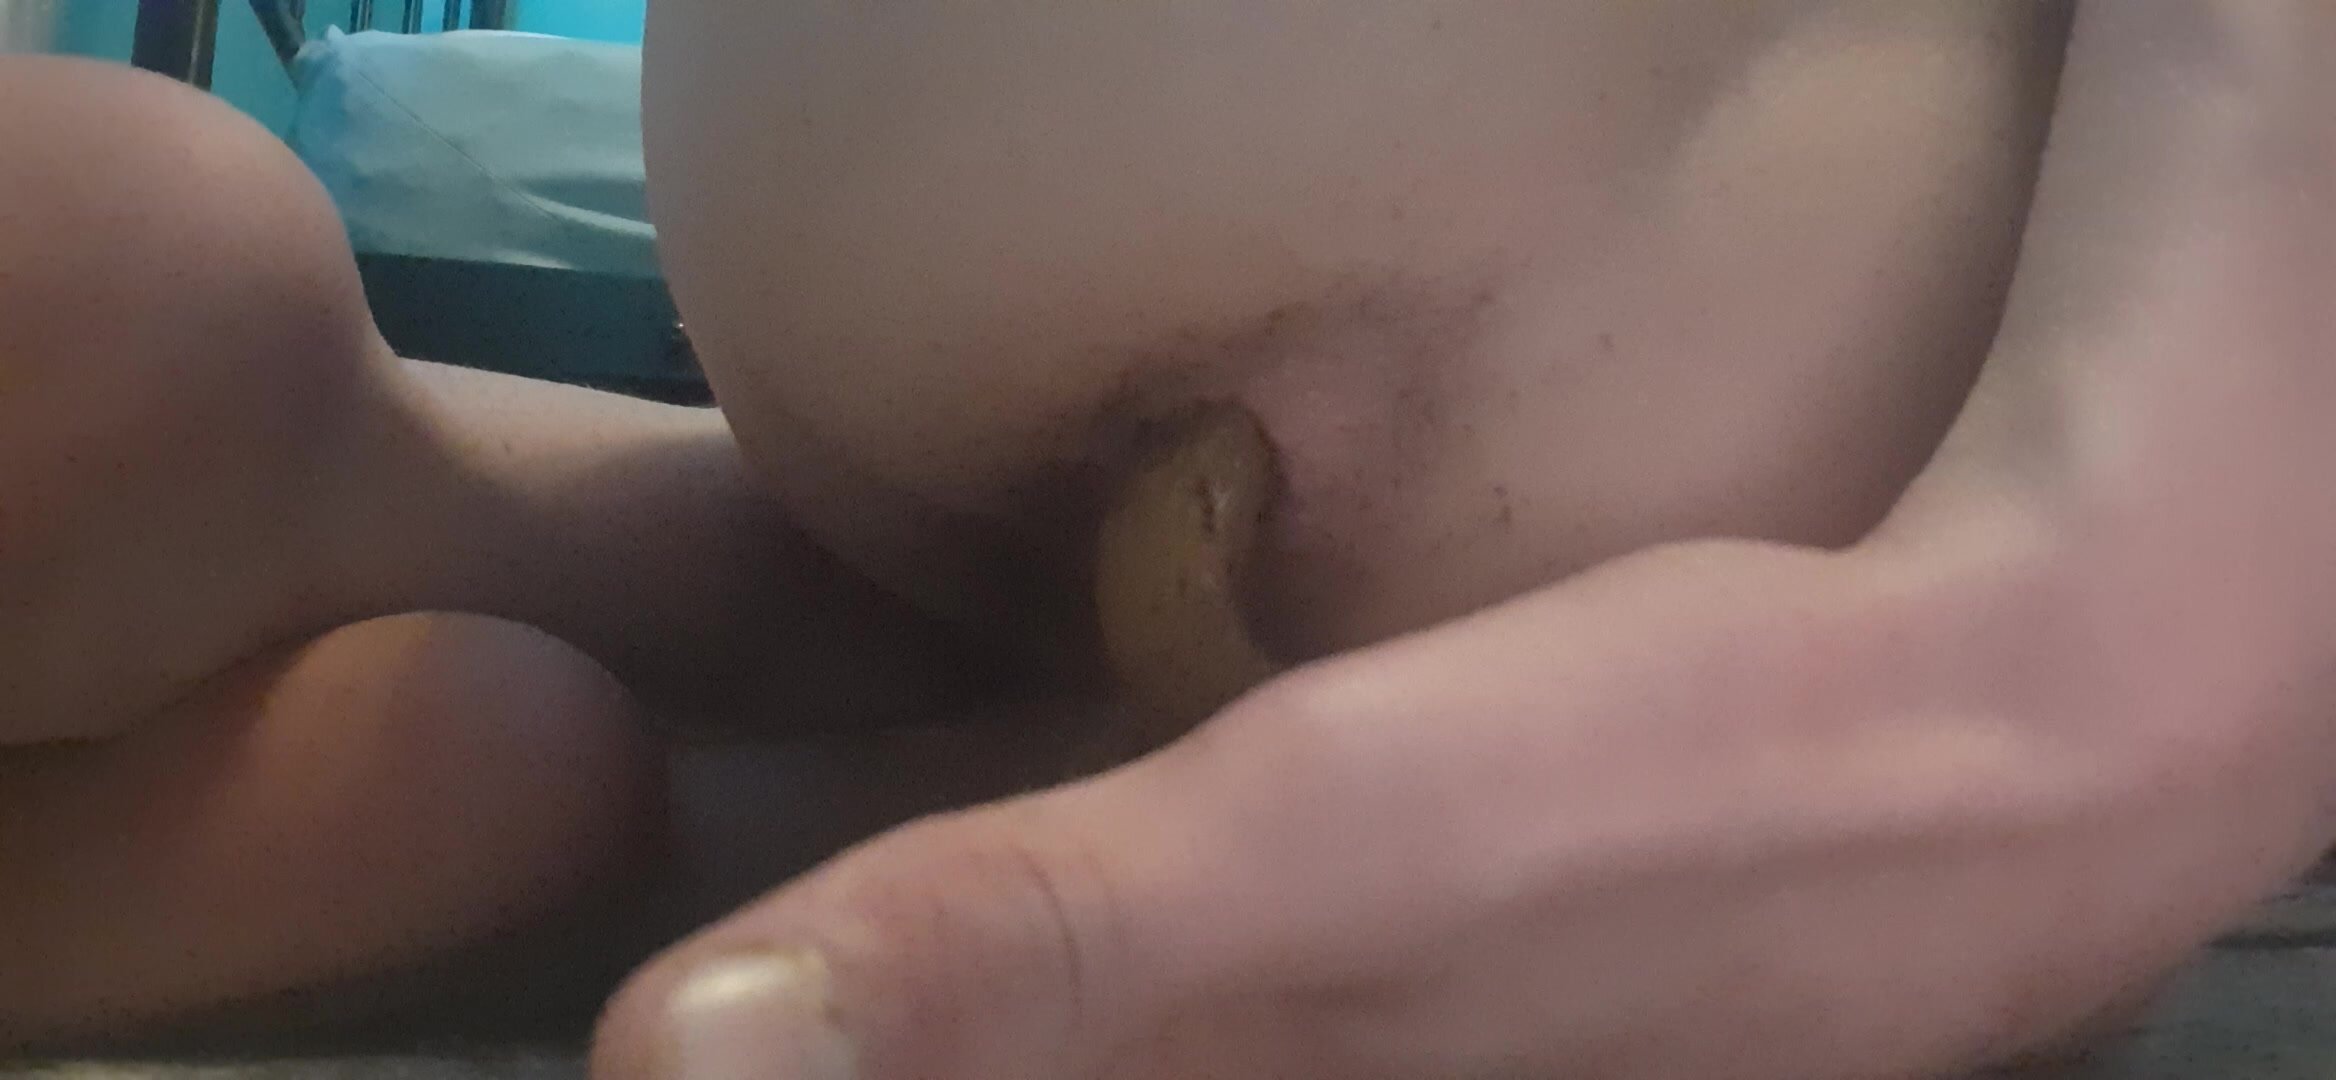 Friend had to shit after big dinner